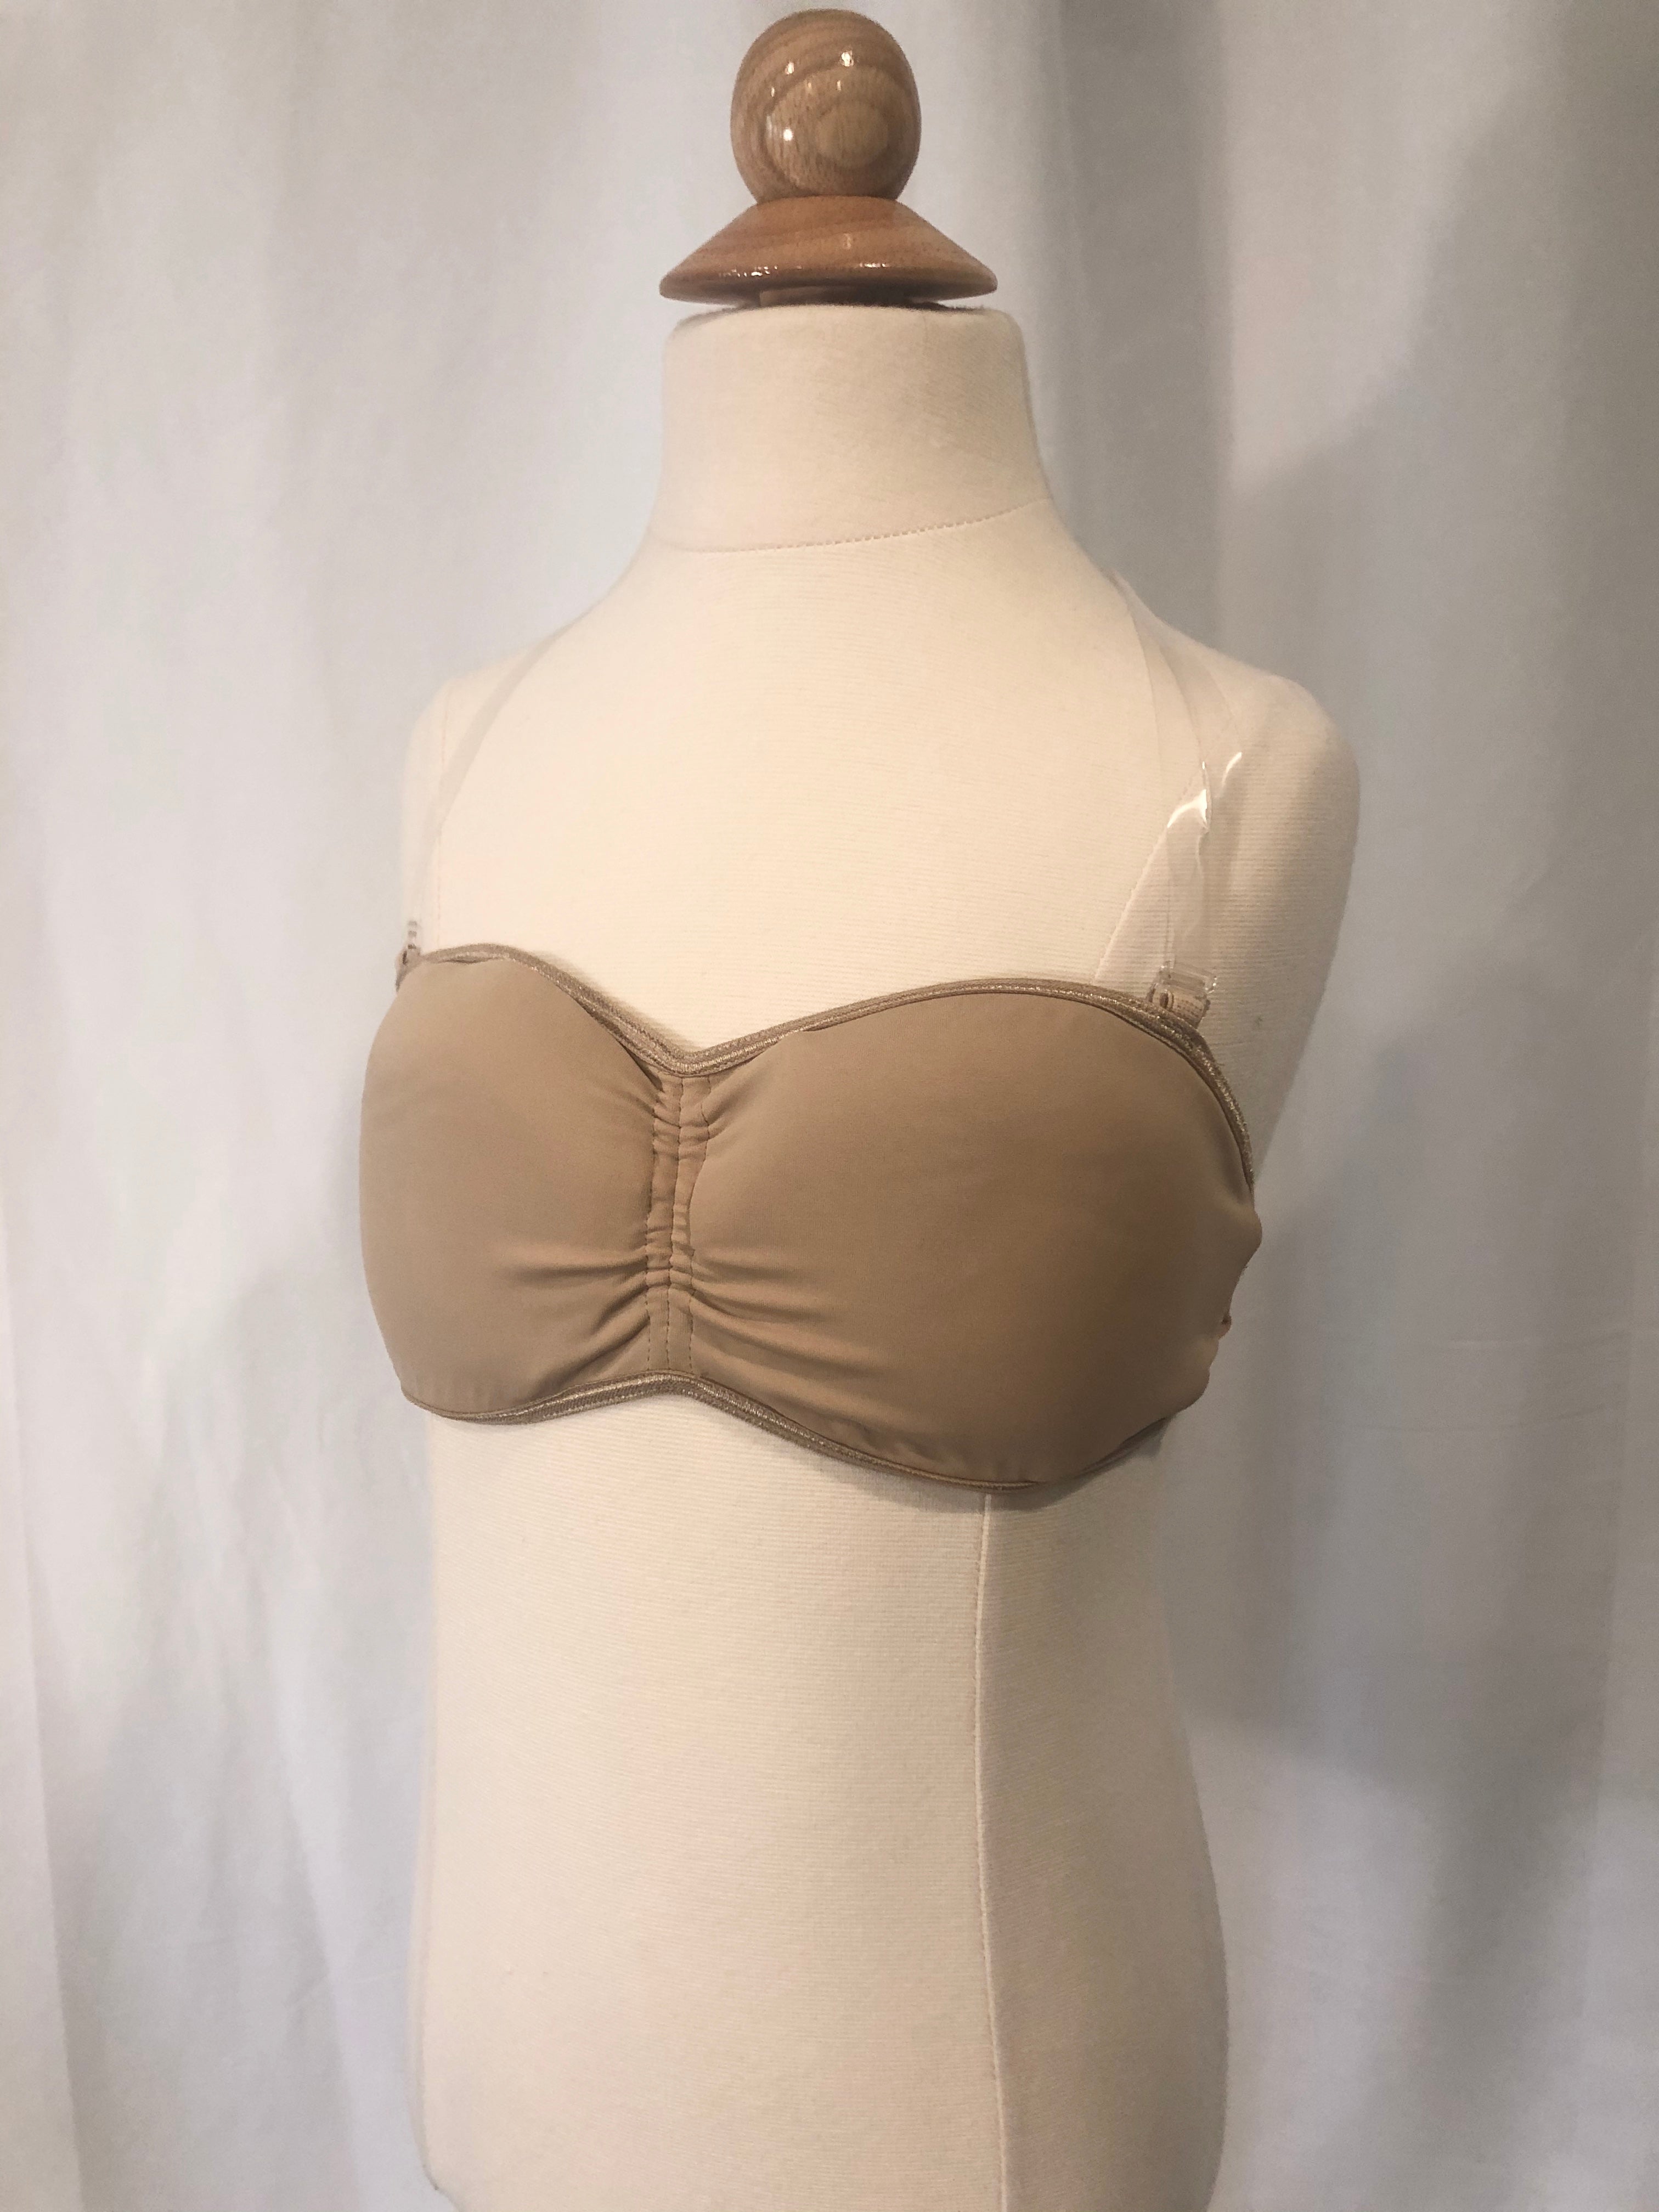 Body Wrappers Adult Padded Bra